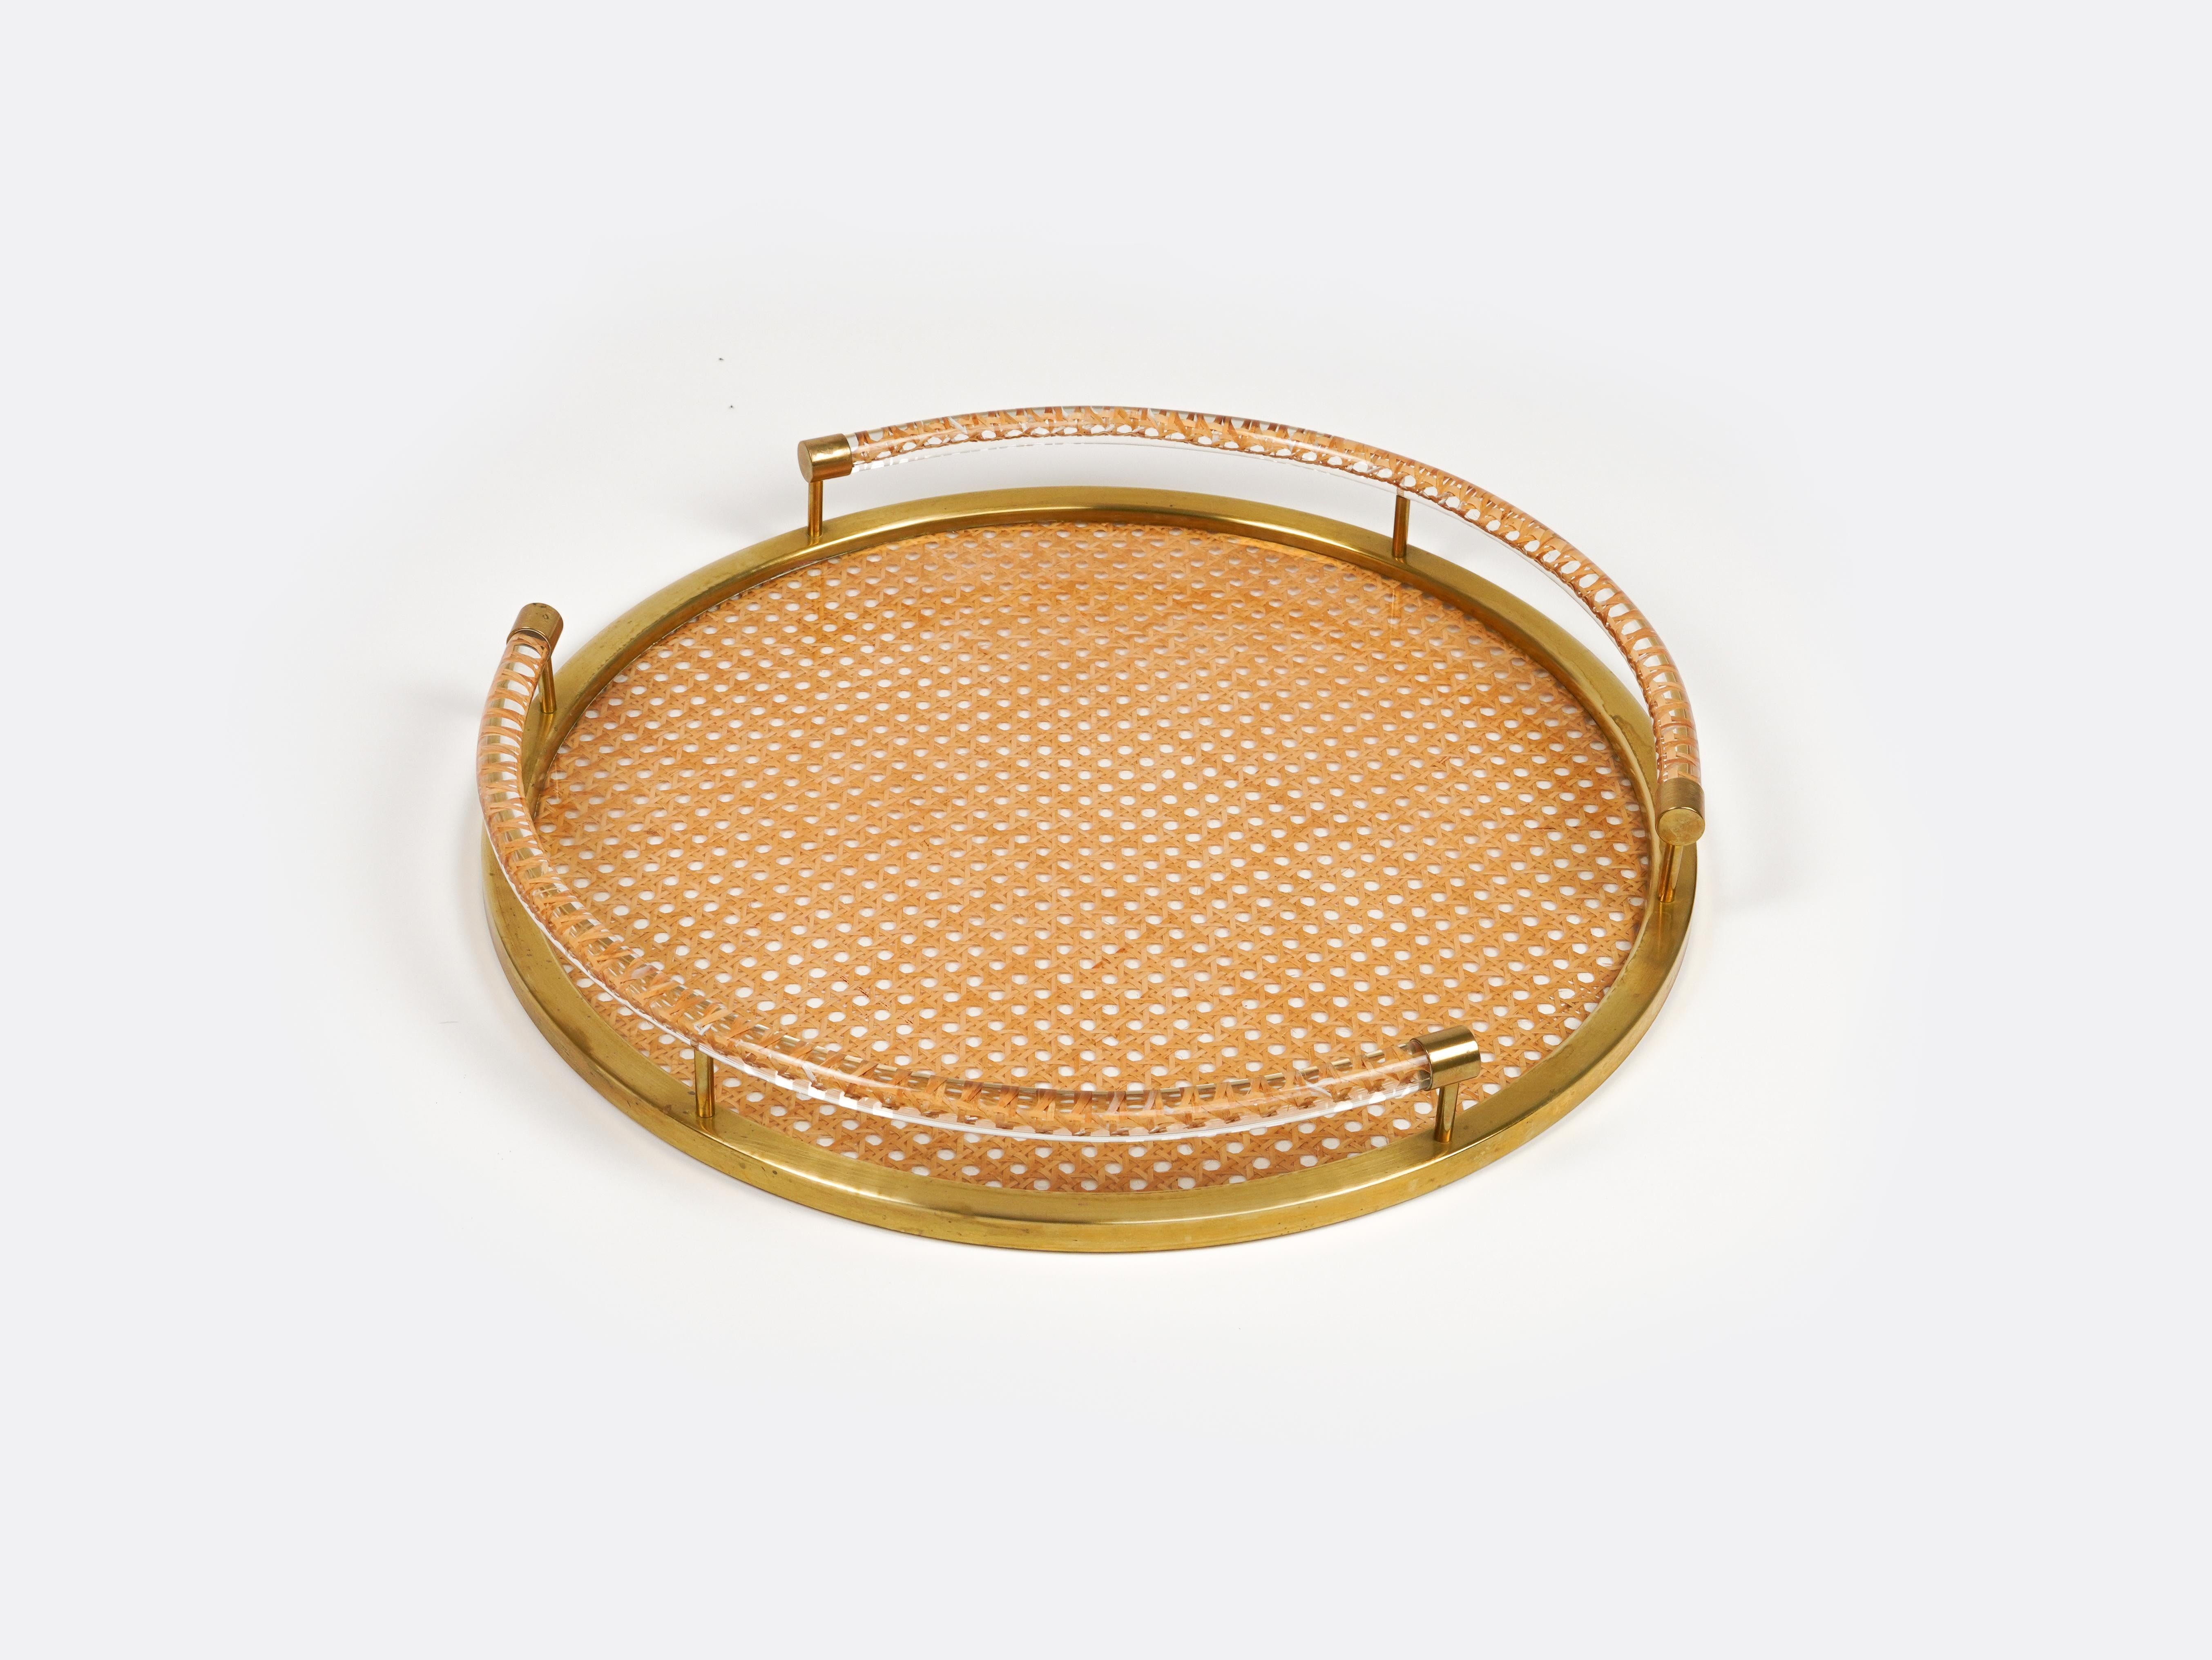 Mid-Century Modern Round Serving Tray in Lucite, Rattan and Brass Christian Dior Style, Italy 1970s For Sale